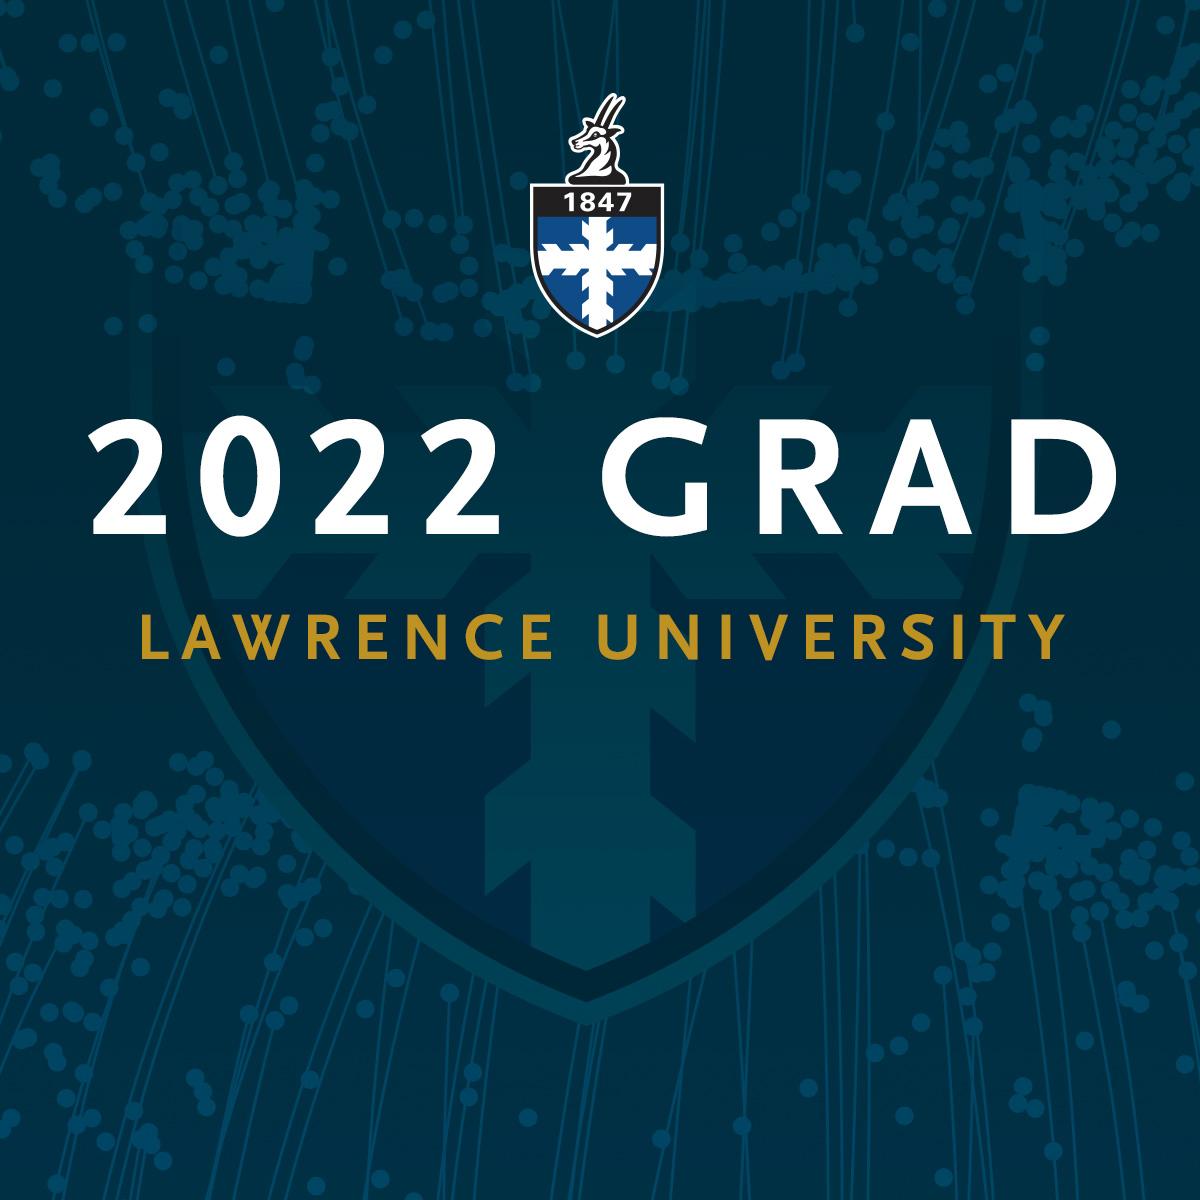 Lawrence University crest with words "2022 Grad Lawrence University"